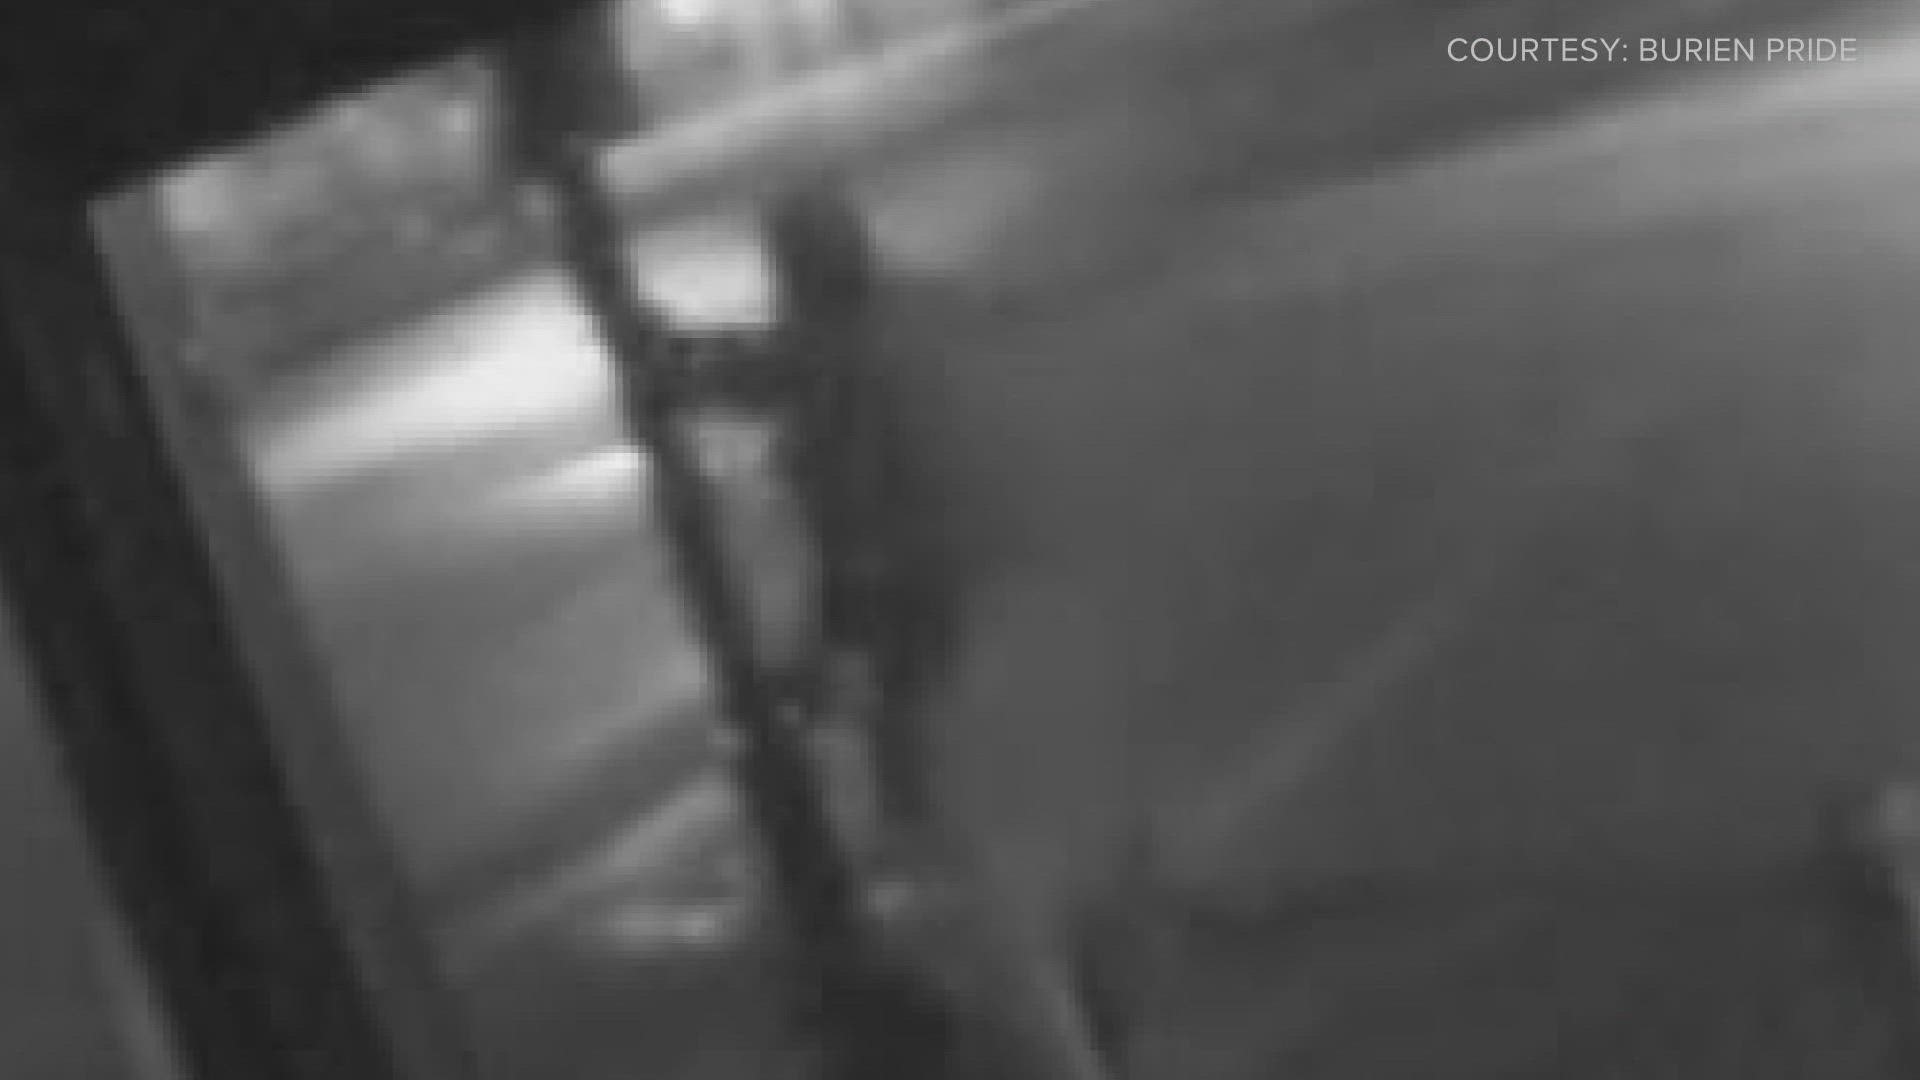 Surveillance video caught a thief stealing Pride flags from downtown Burien early Saturday morning